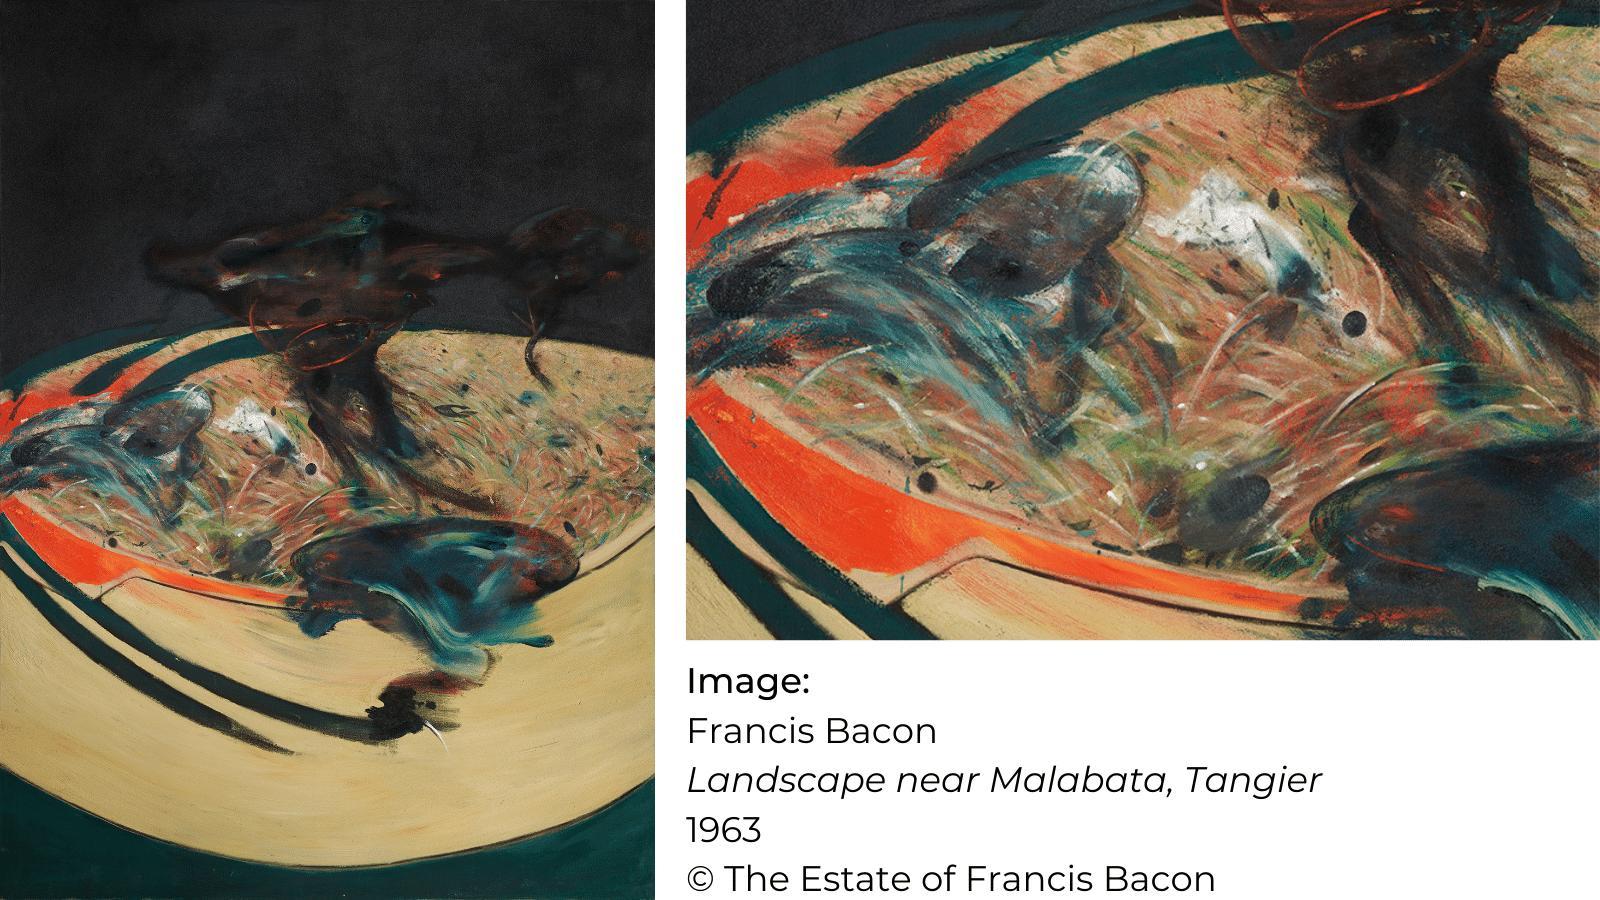 The Estate of Francis Bacon